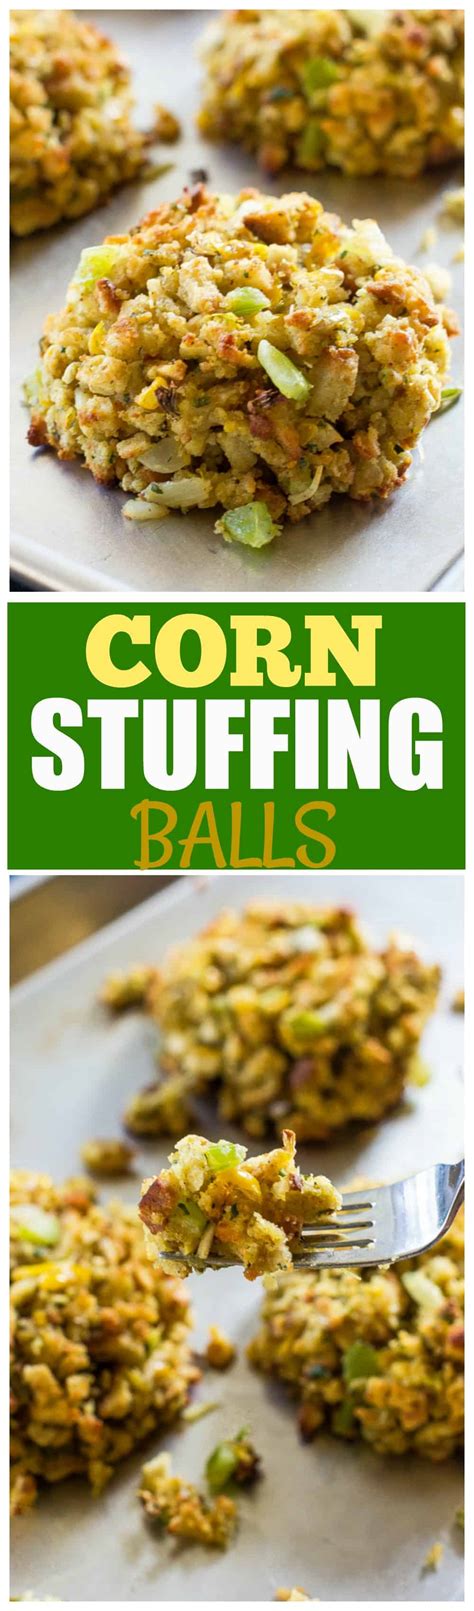 corn-stuffing-balls-recipe-the-girl-who-ate-everything image